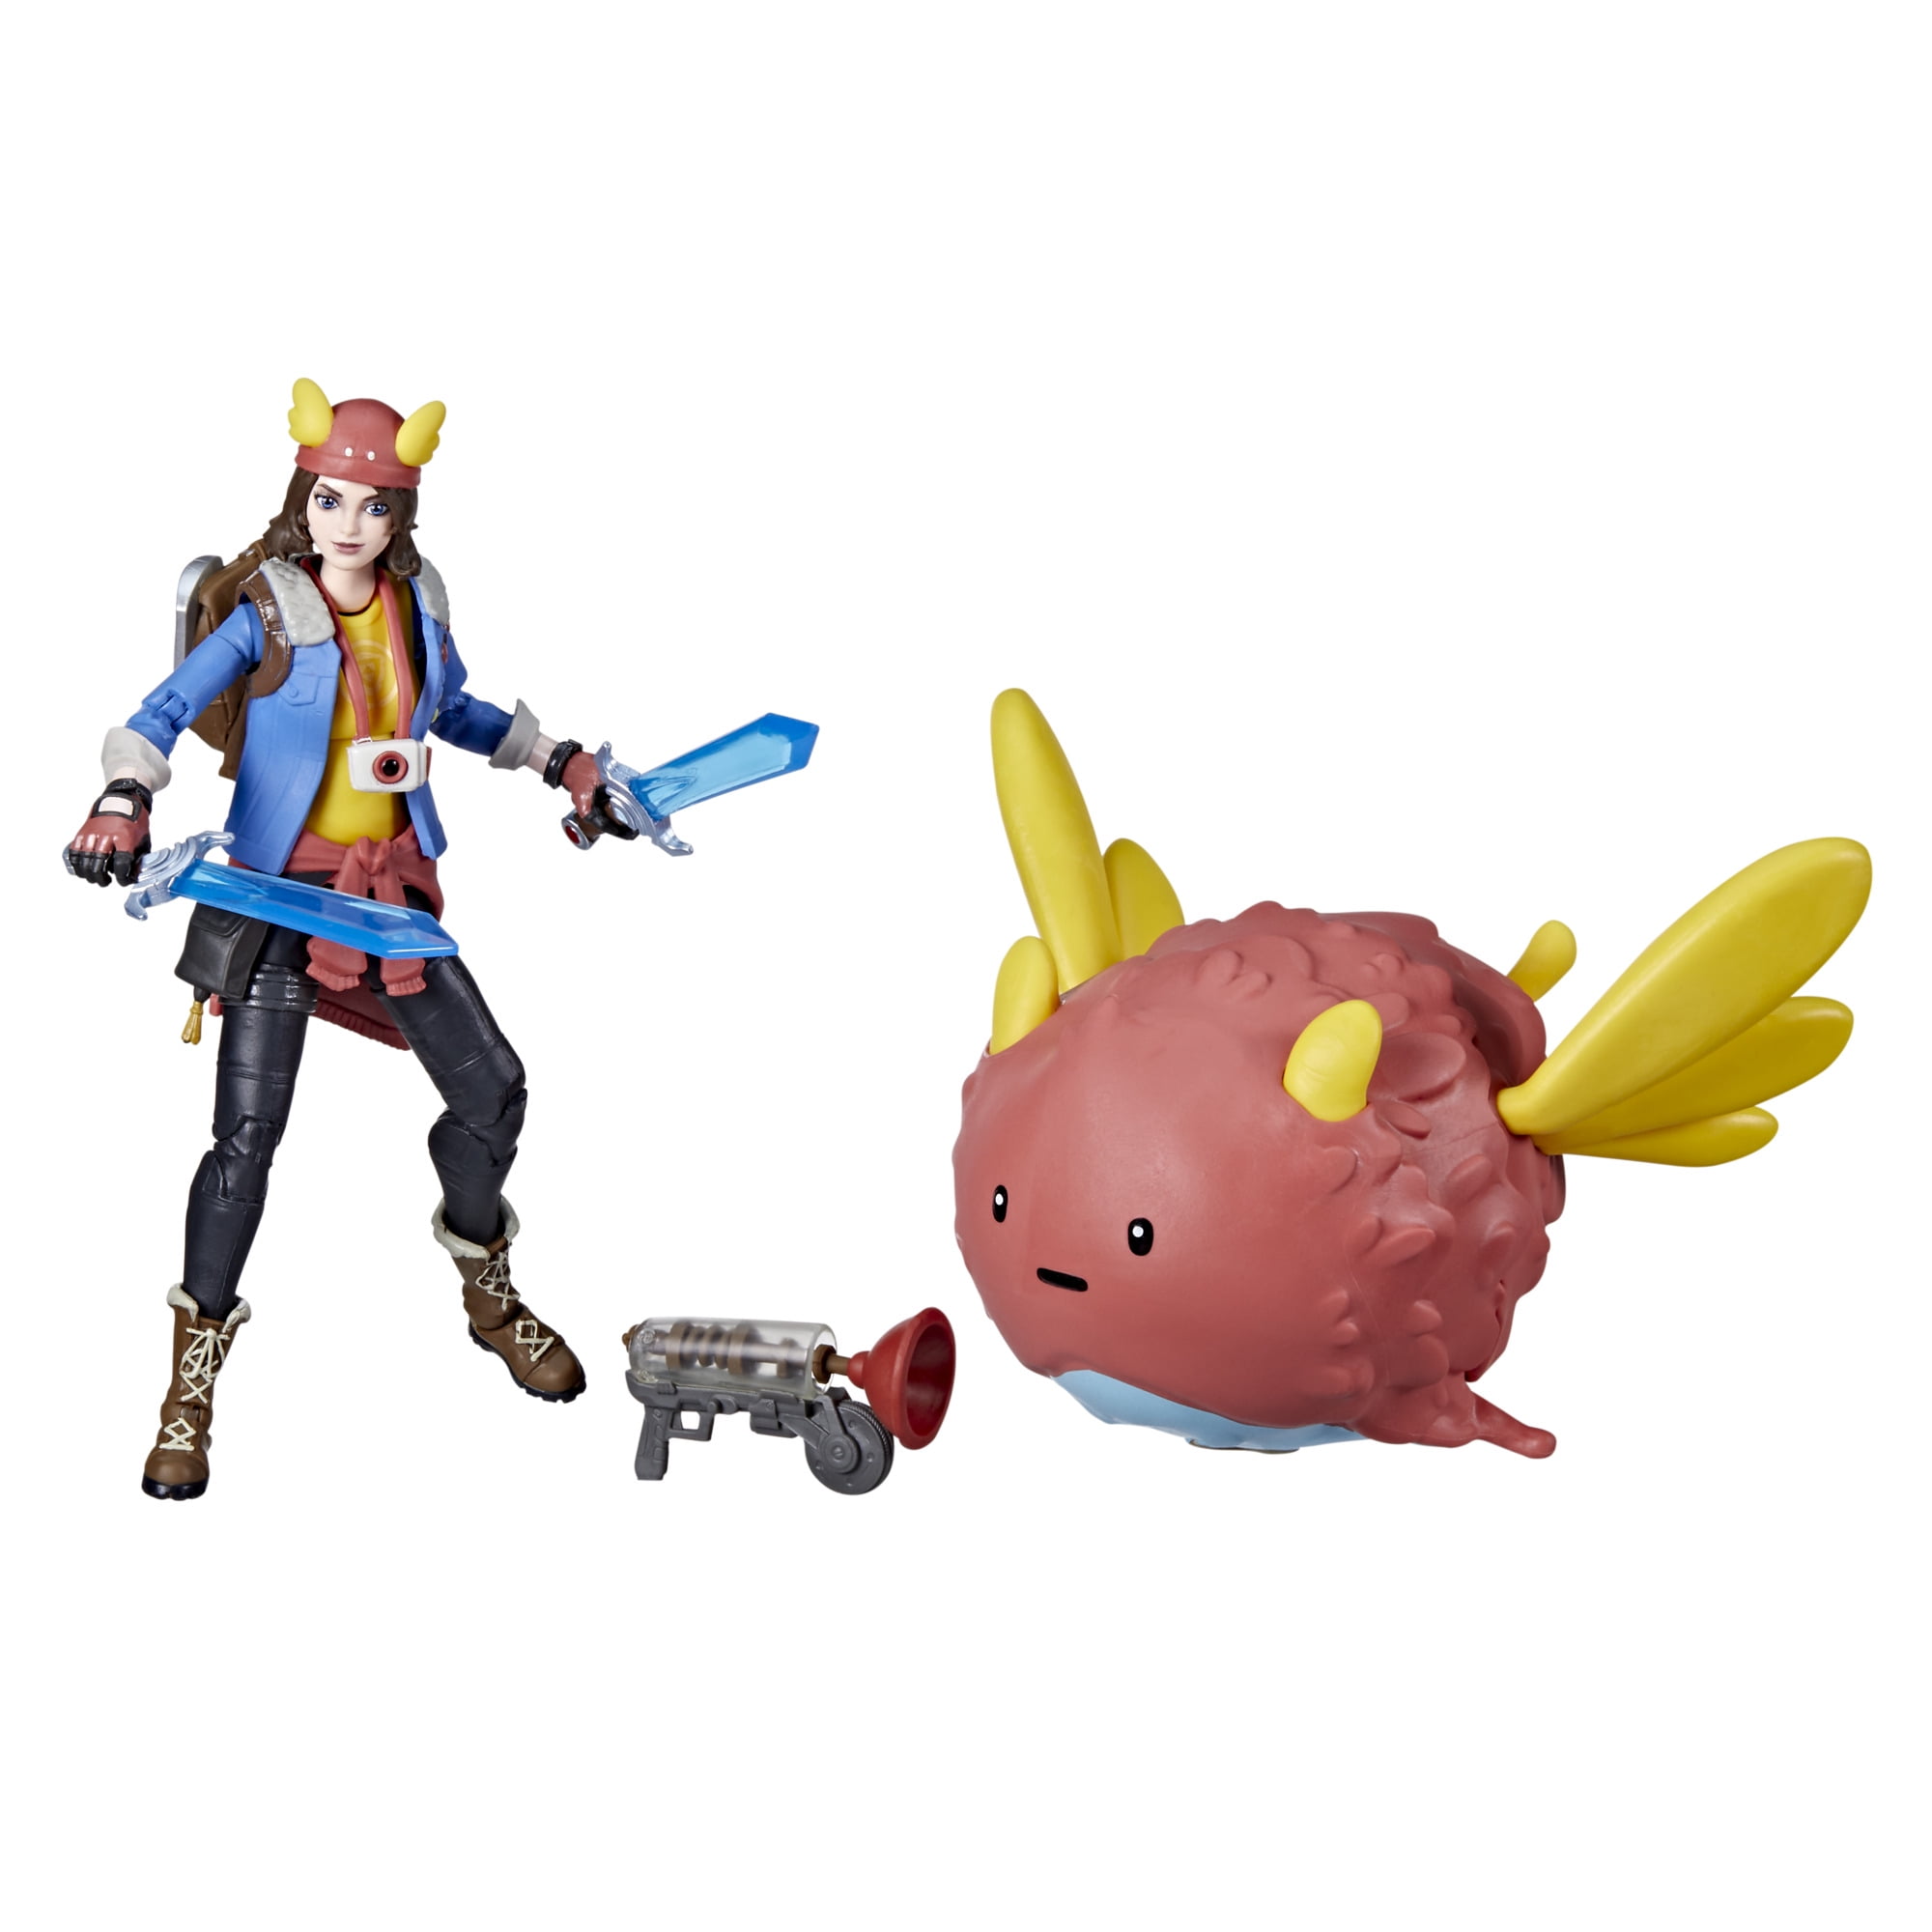 Fortnite Agent's Room Assortment, includes 2 (4-inch) Articulated 